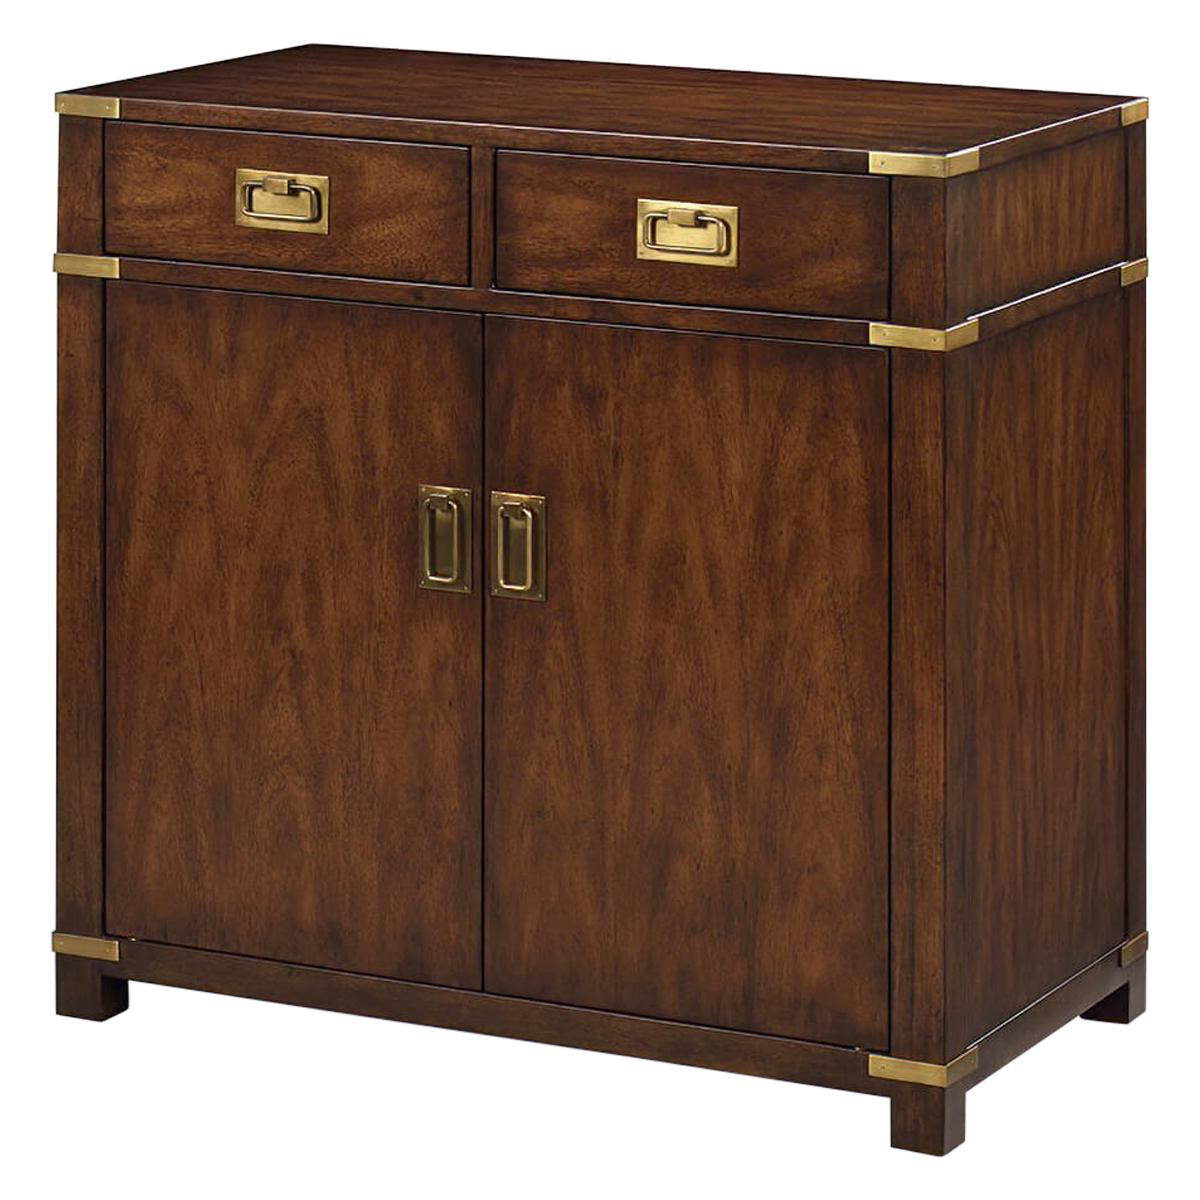 Campaign Style Cabinet